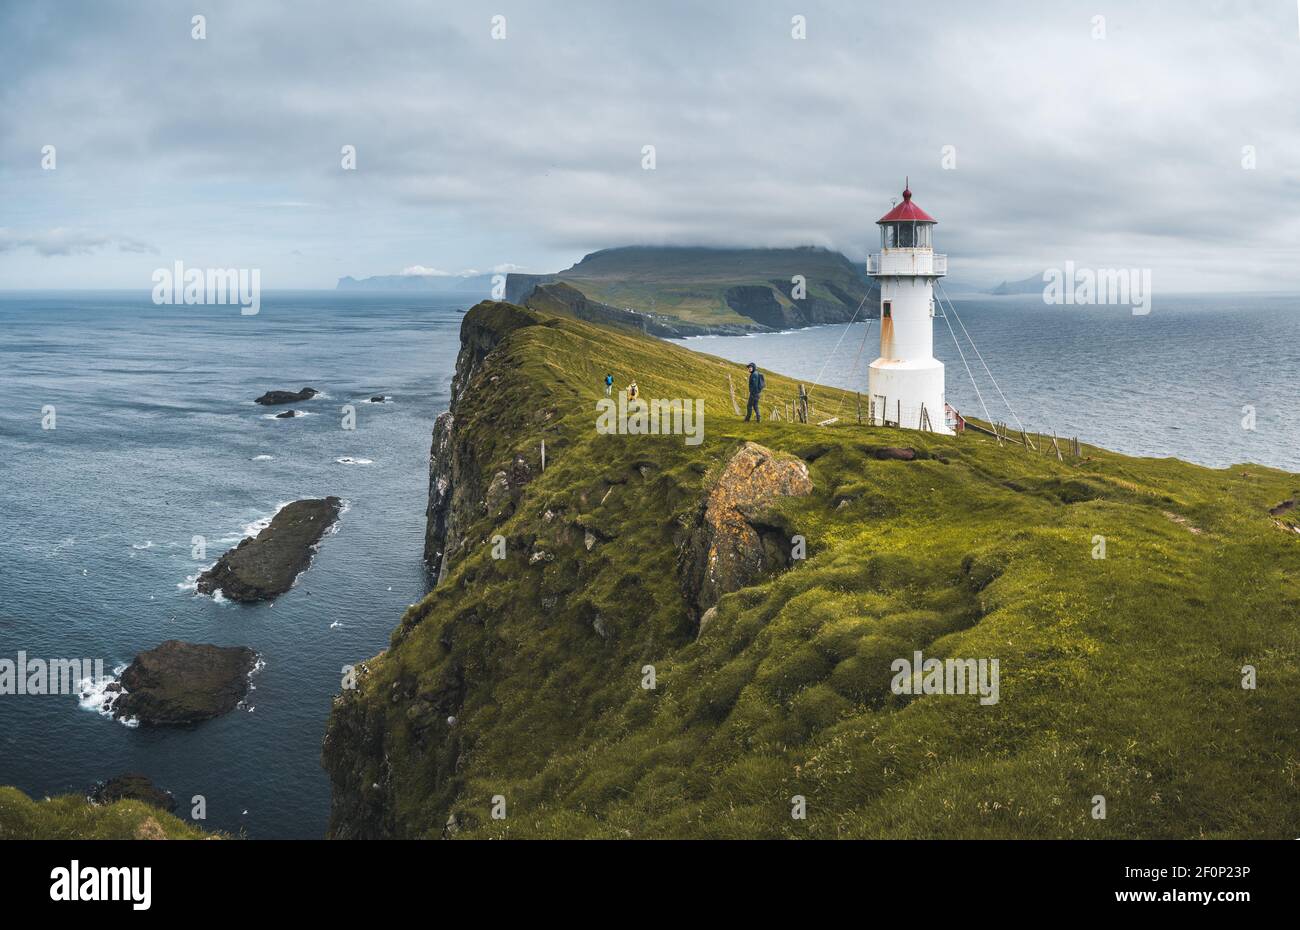 View Towards Lighthouse on the island of Mykines Holmur, Faroe Islandson a cloudy day with view towards Atlantic Ocean. Stock Photo